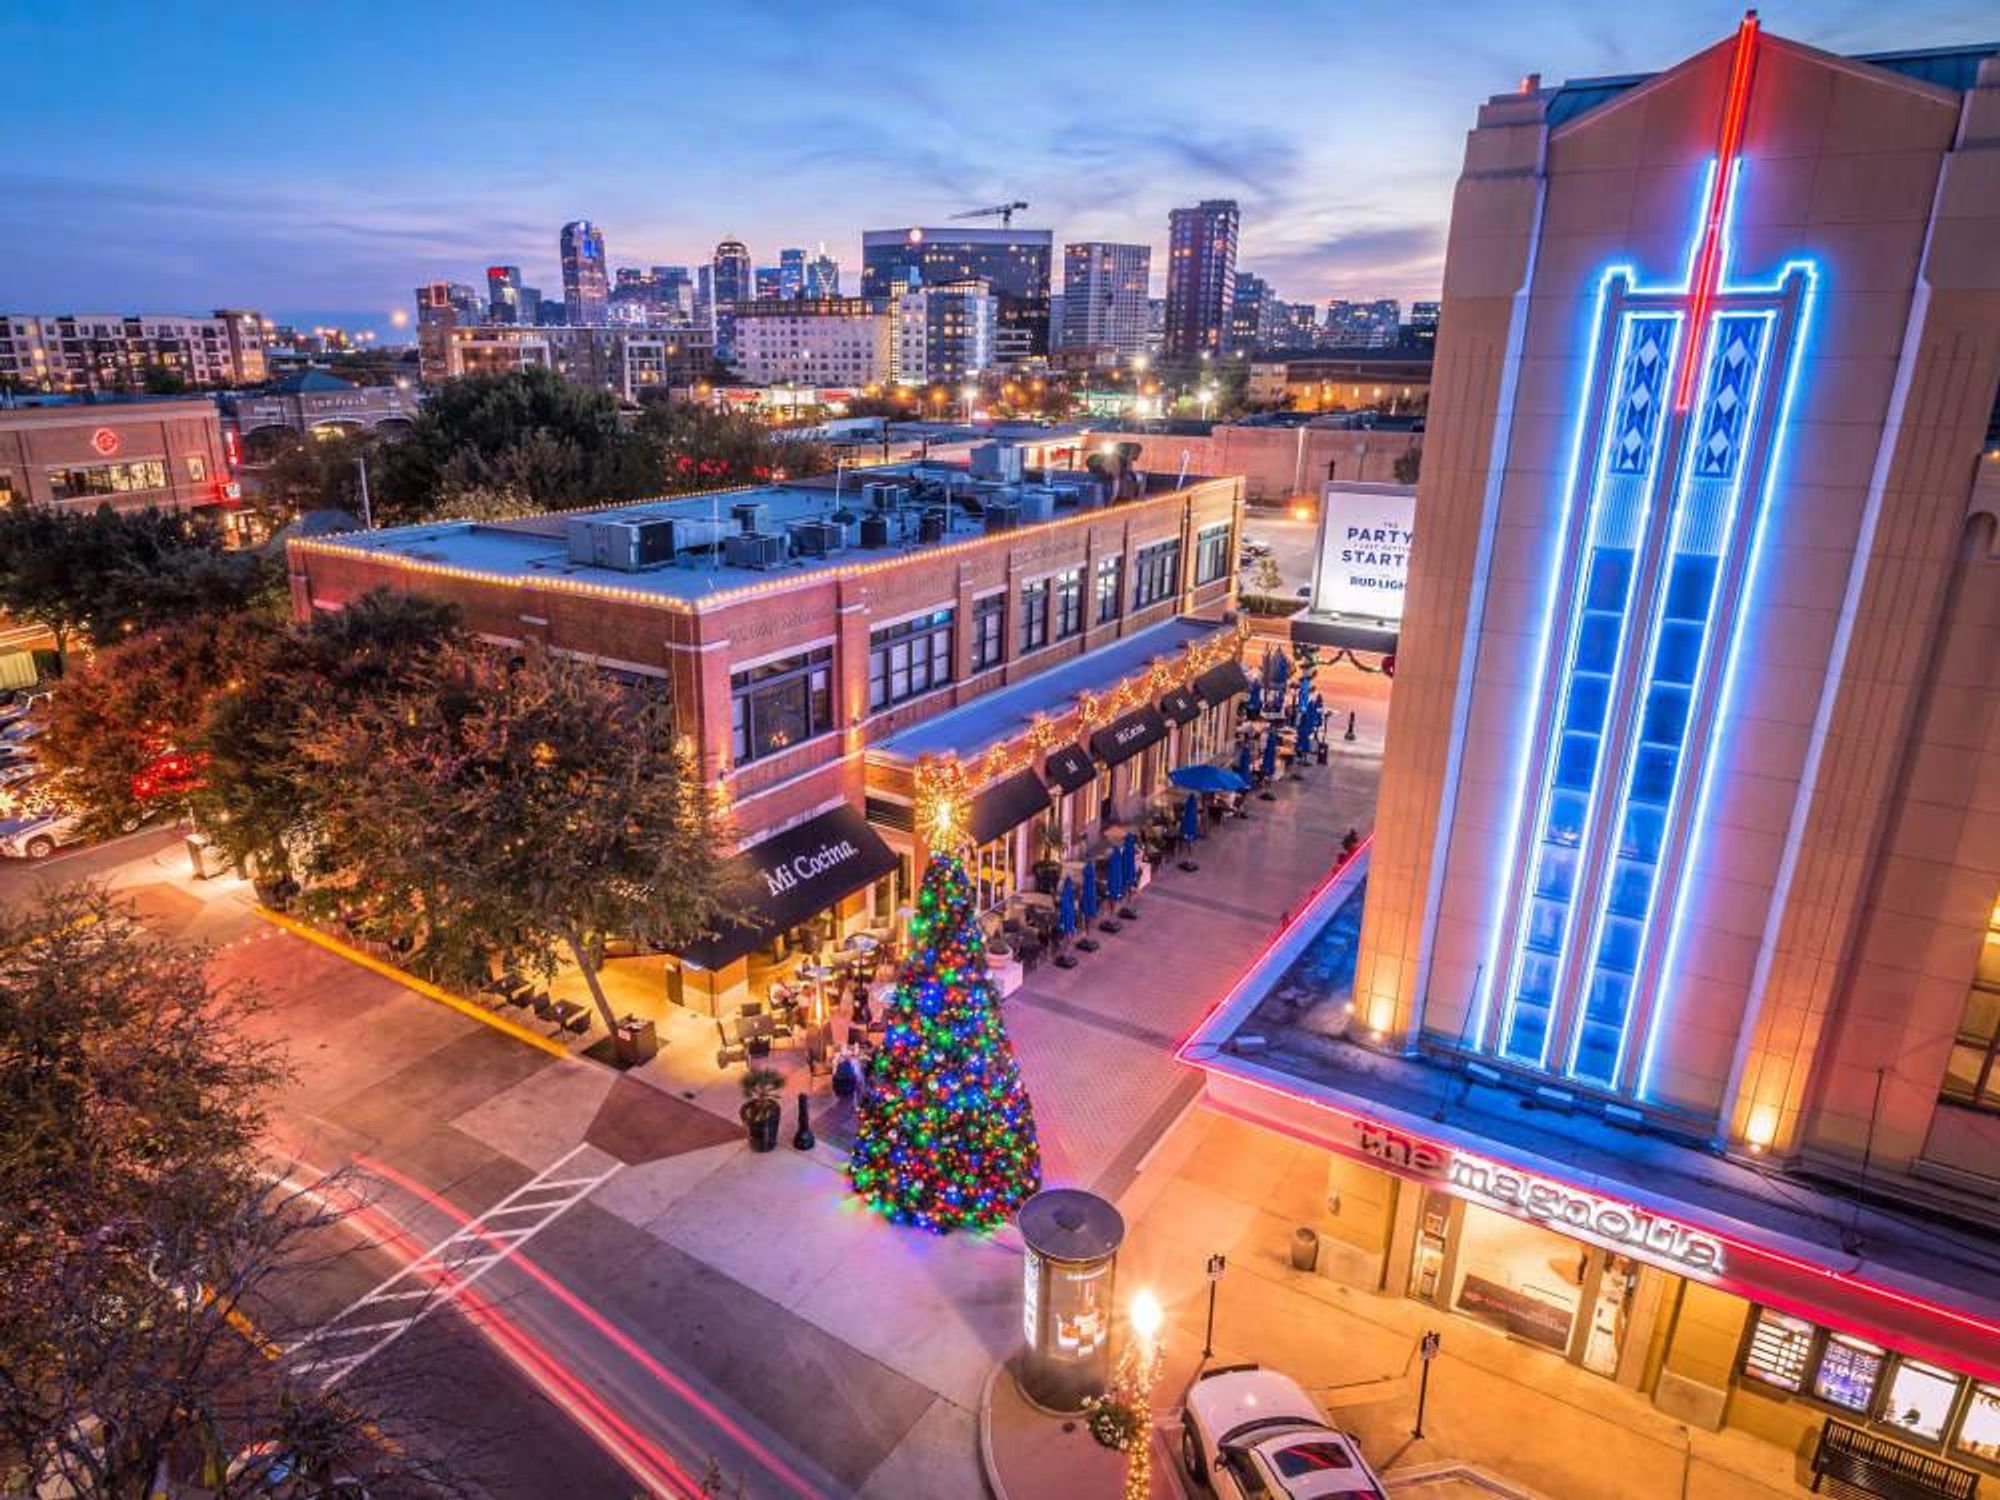 Uptown Dallas' West Village at the holidays